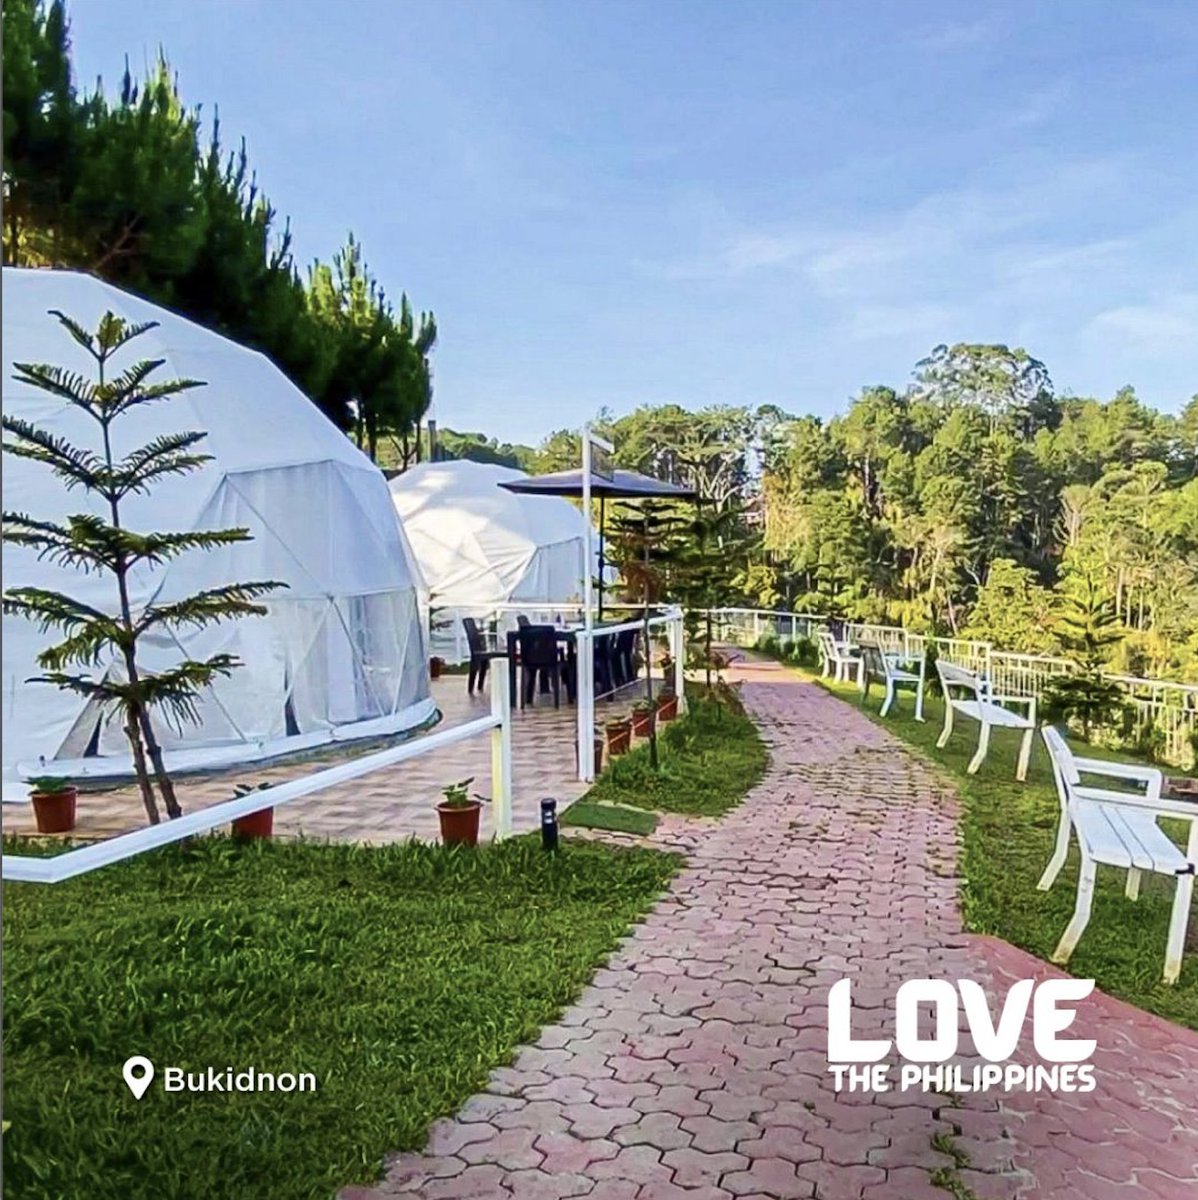 Love Camping? Give your usual camping experience a stylish twist when you visit these glamping spots around the Philippines. #LoveThePhilippines #DOTPhilippines #LoveCamping